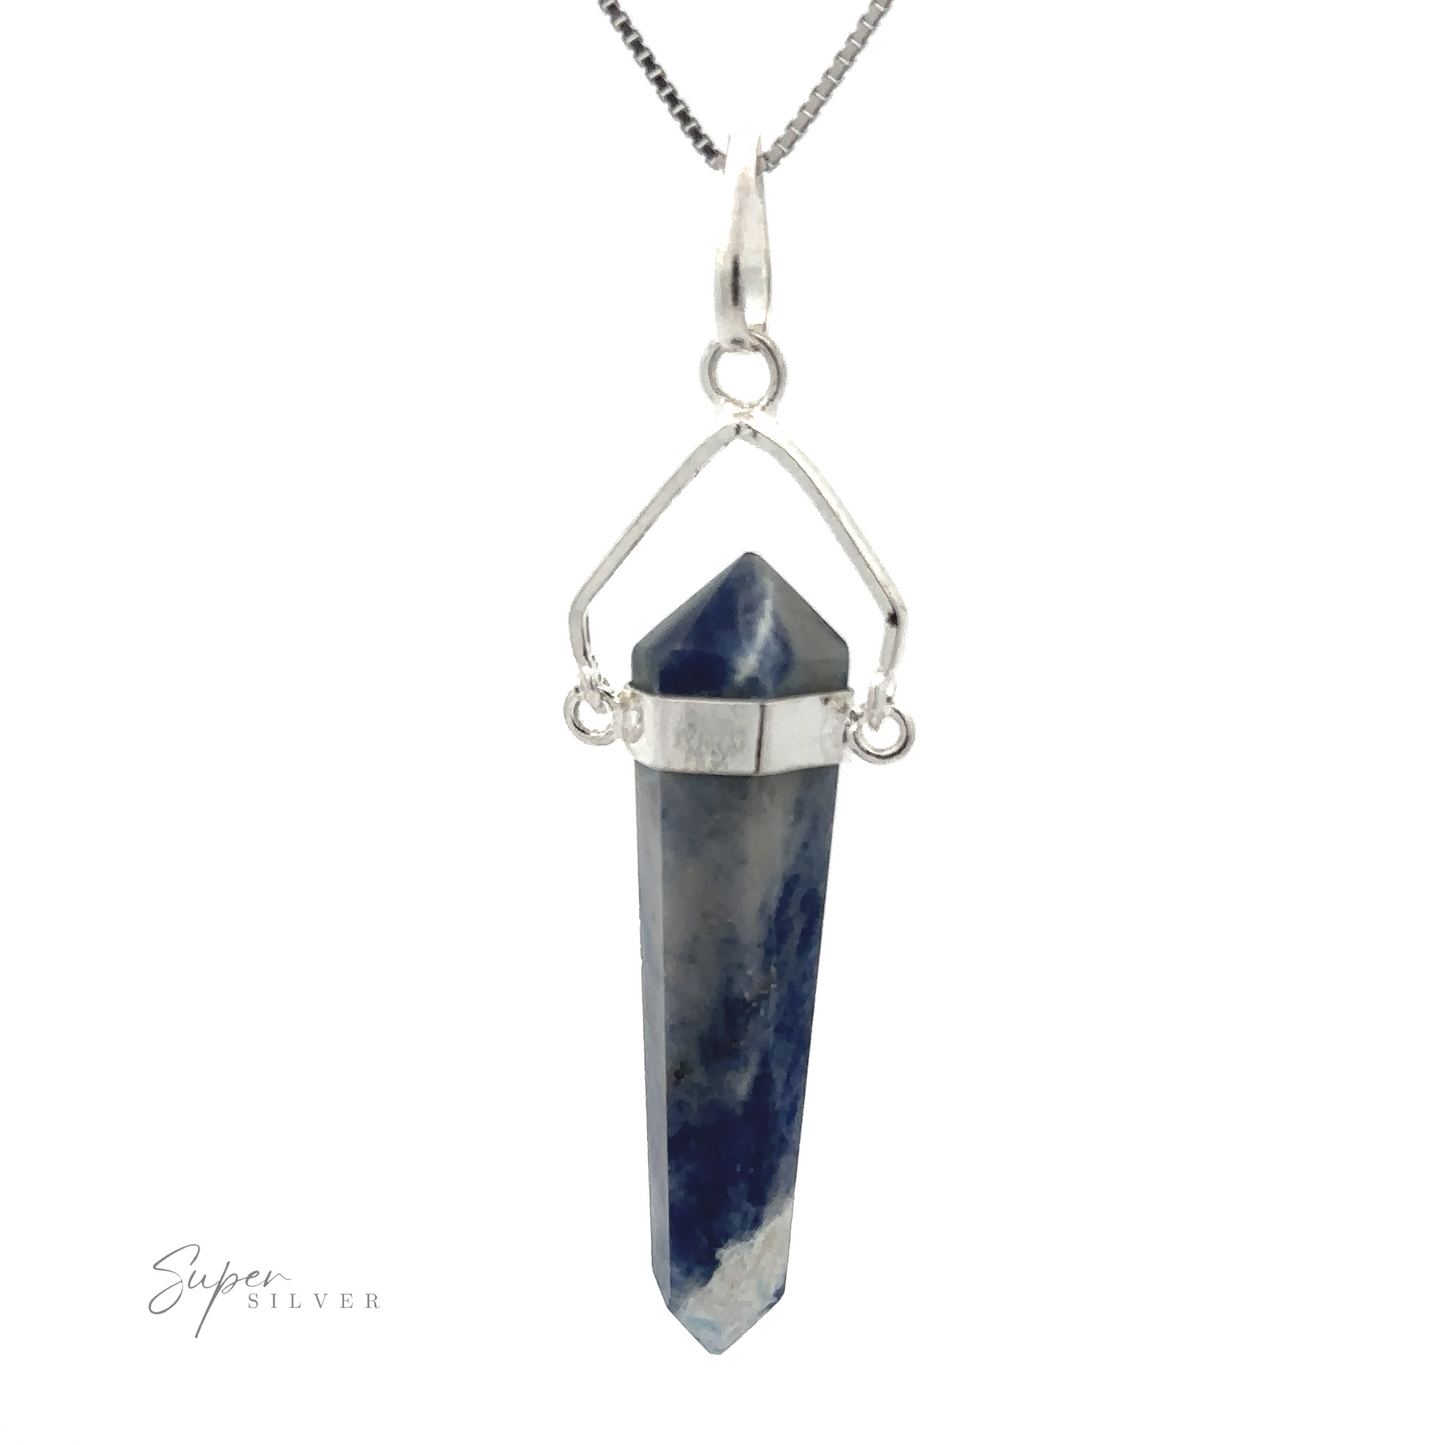 
                  
                    A Raw Stone Swivel Pendant encased in a silver-plated geometric frame, hanging from a silver chain. The long, pointed pendant resembles a raw stone obelisk.
                  
                